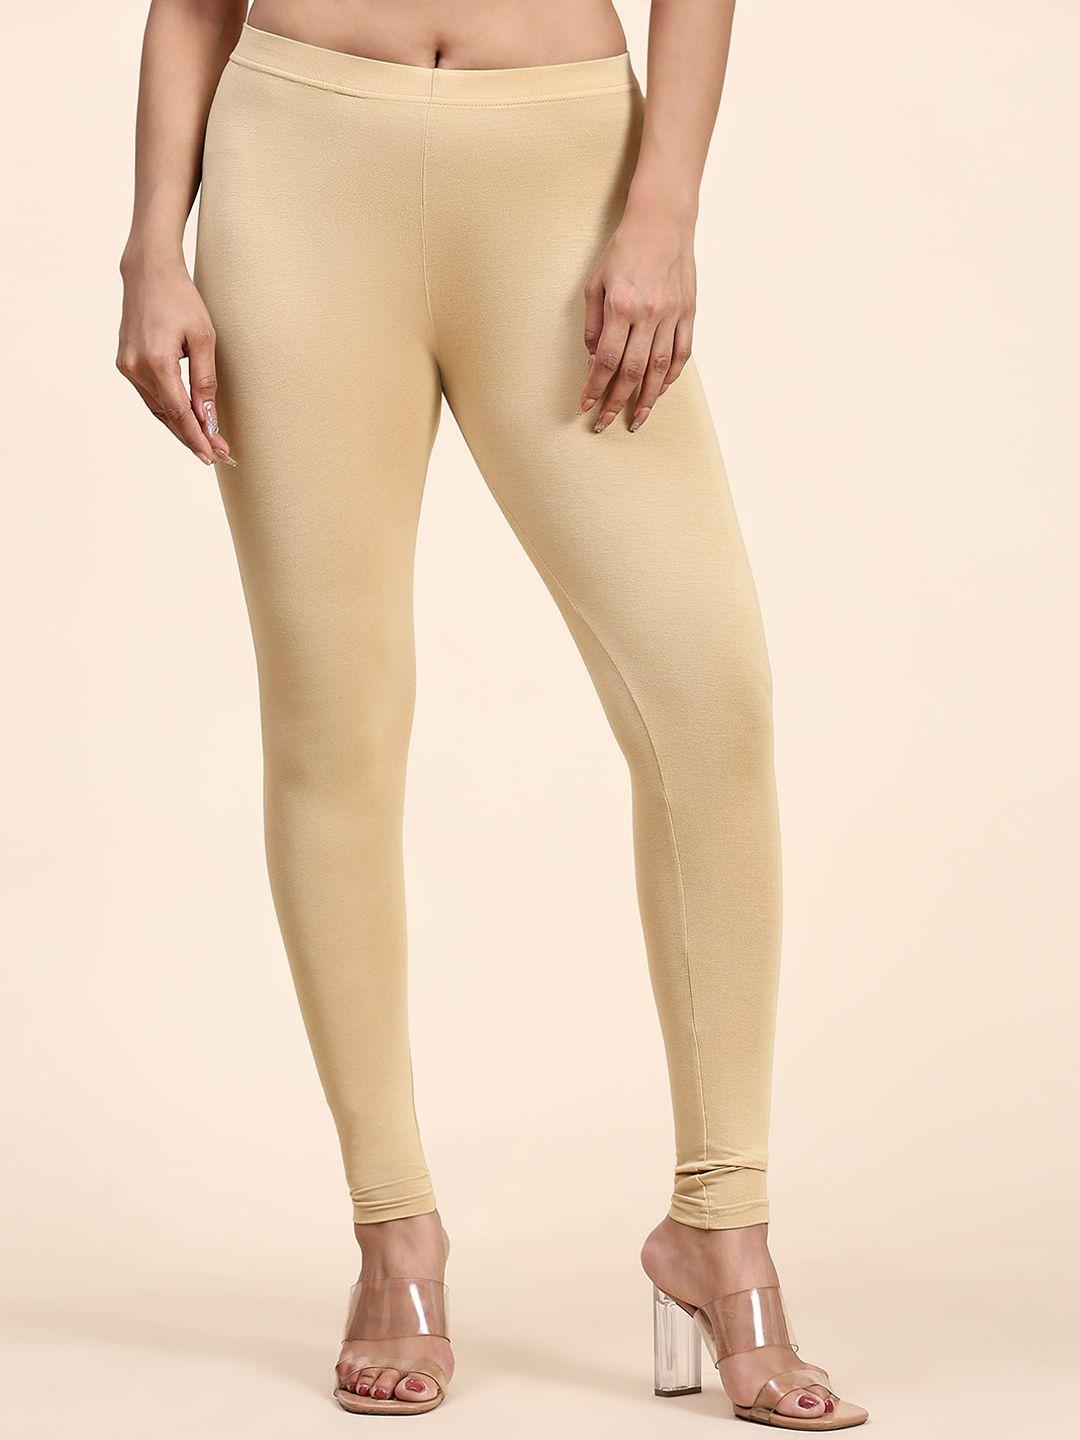 outflits skinny-fit ankle-length leggings